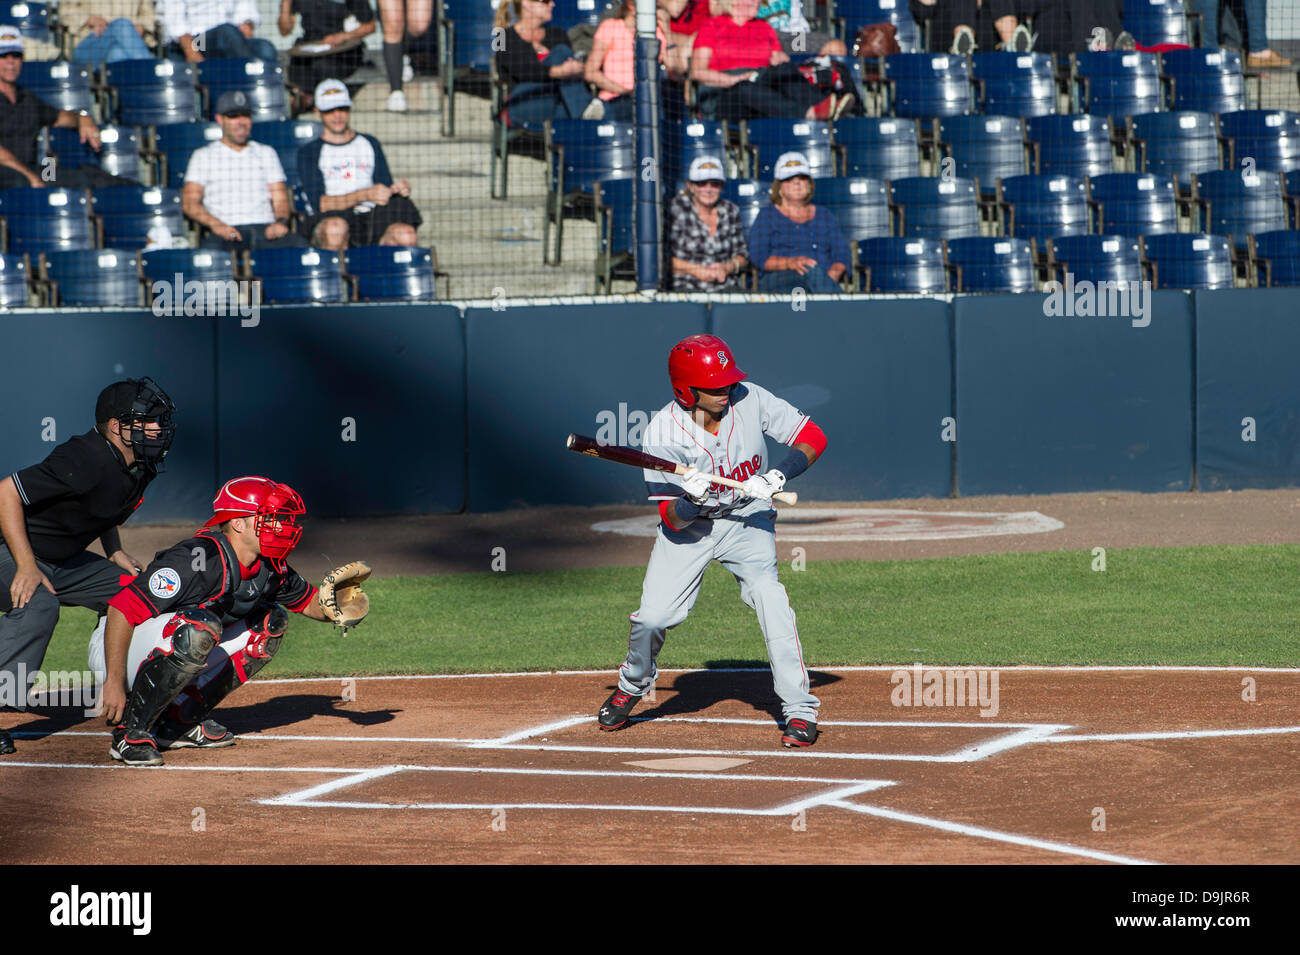 Vancouver , British Columbia, Canada. June 18 2013 . Spokane Indians center fielder Christopher Garia (3) ready to bunt at second home game between Vancouver Canadians and Spokane Indians at Scotiabank Field at Nat Bailey Stadium Vancouver , British Columbia Canada on June 18 2013 . Photographer Frank Pali/Alamy Live News Stock Photo